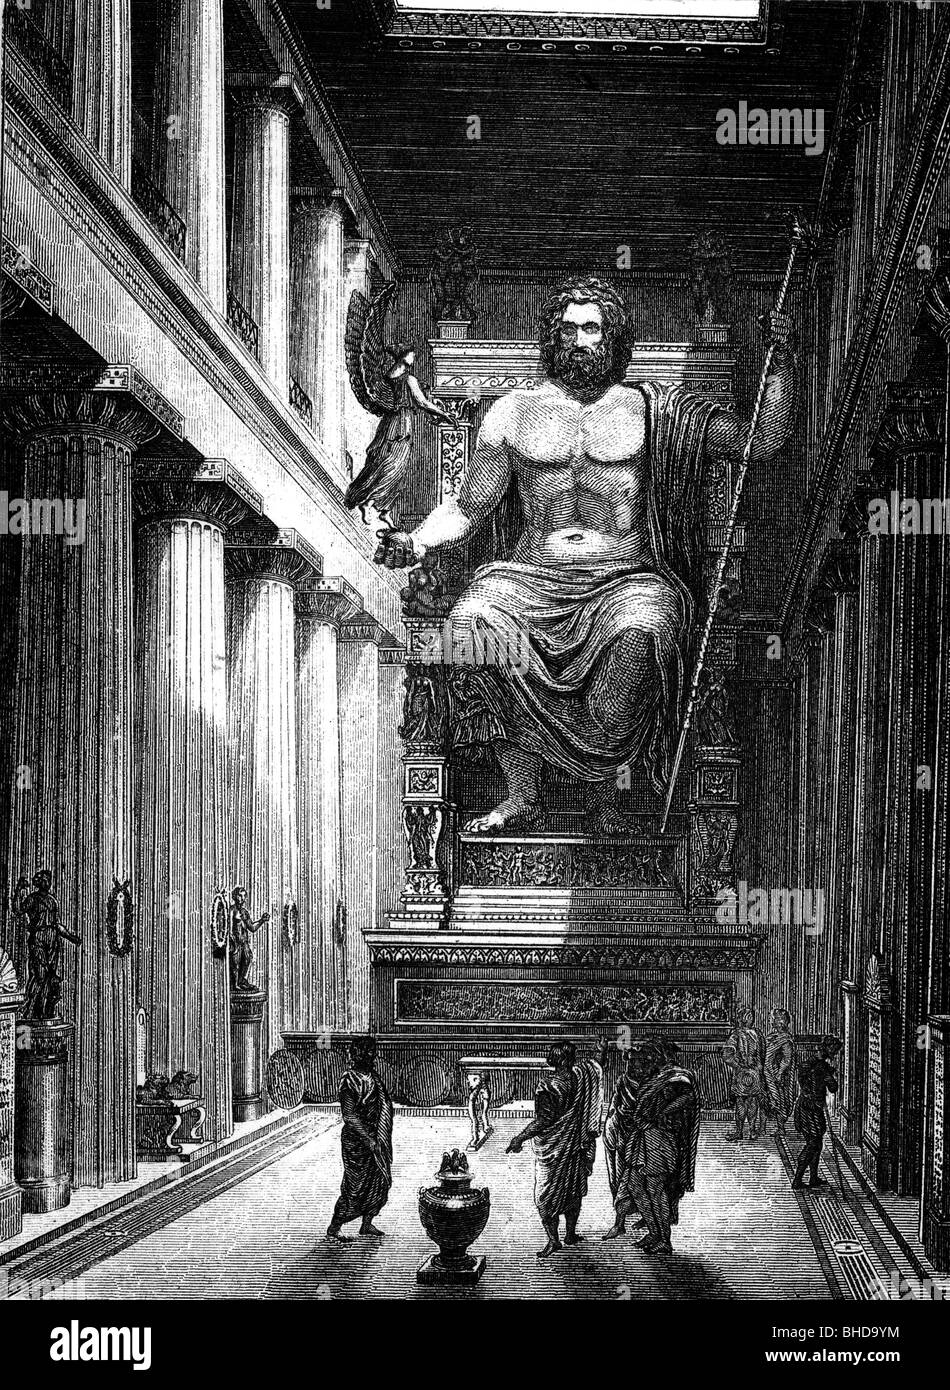 Ancient World, Seven Wonders of the World, Temple of Zeus at Olympia, interior view with statue by PÜhidias, reconstruction, wood engraving, 19th century, graphic, graphics, statue, architecture, Jupiter, Jove, historic, historical, ancient world, Greece, people, Stock Photo